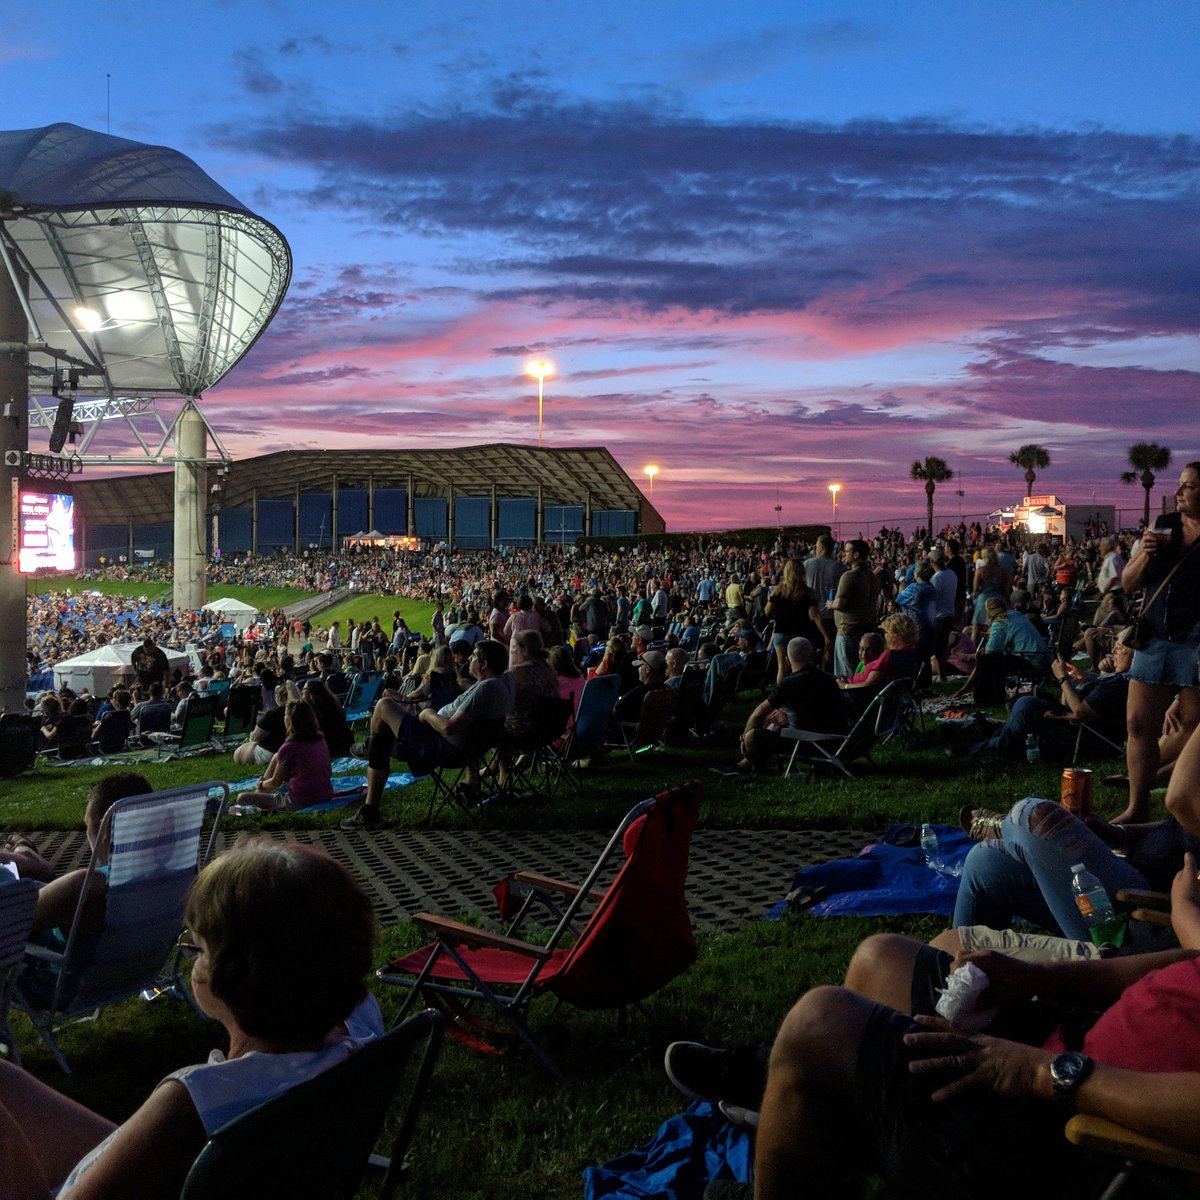 THE MIDFLORIDA CREDIT UNION AMPHITHEATRE (Tampa) All You Need to Know